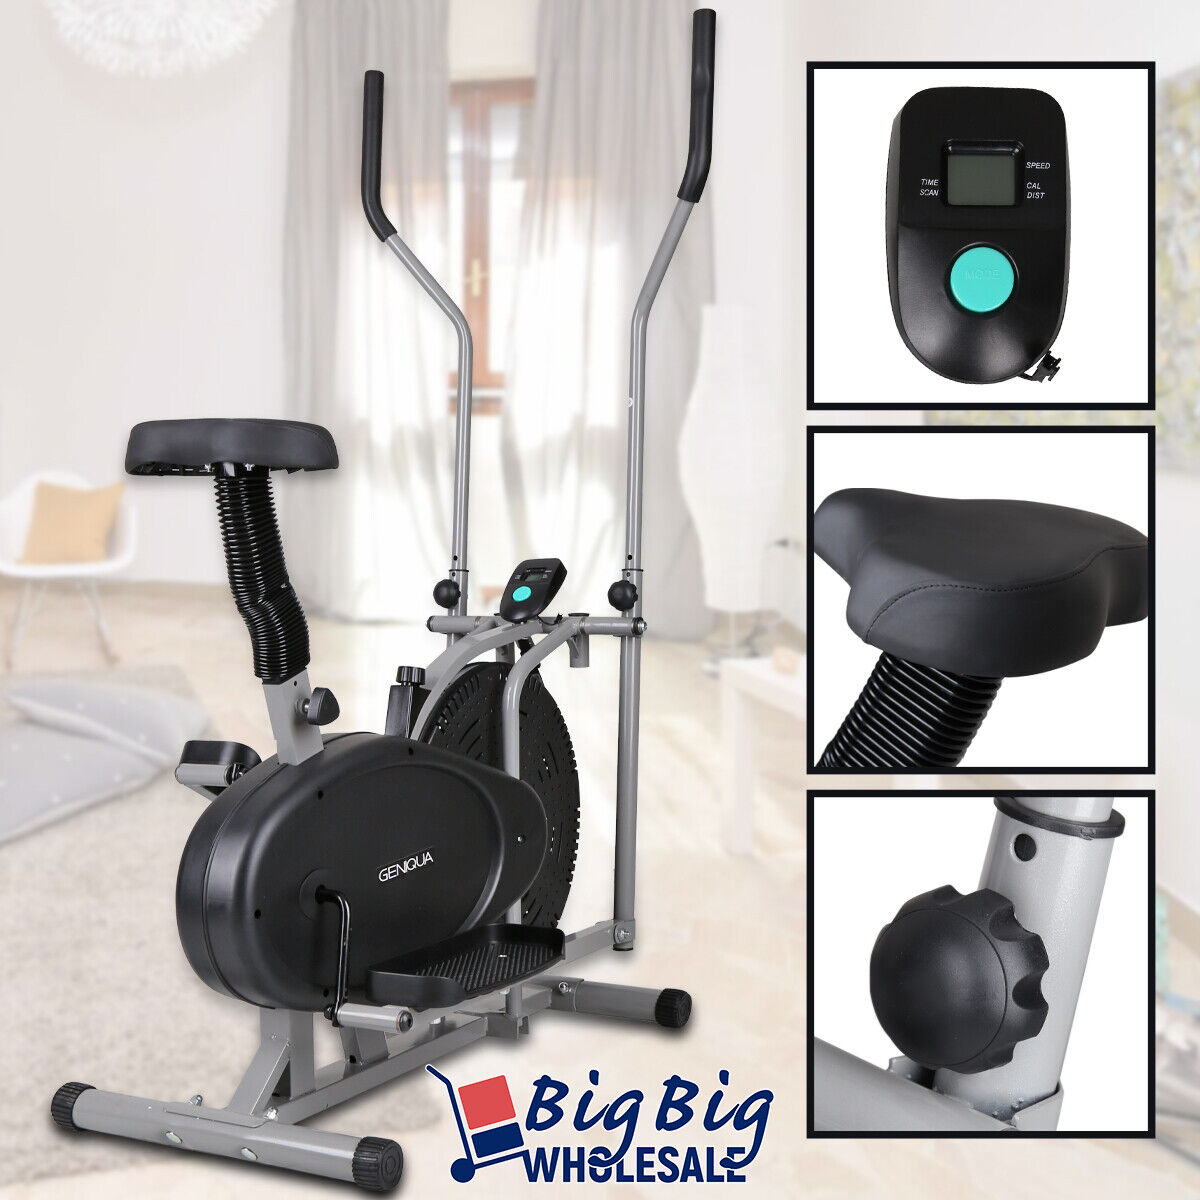 2-in-1 Cardio Elliptical Trainer for Home Fitness